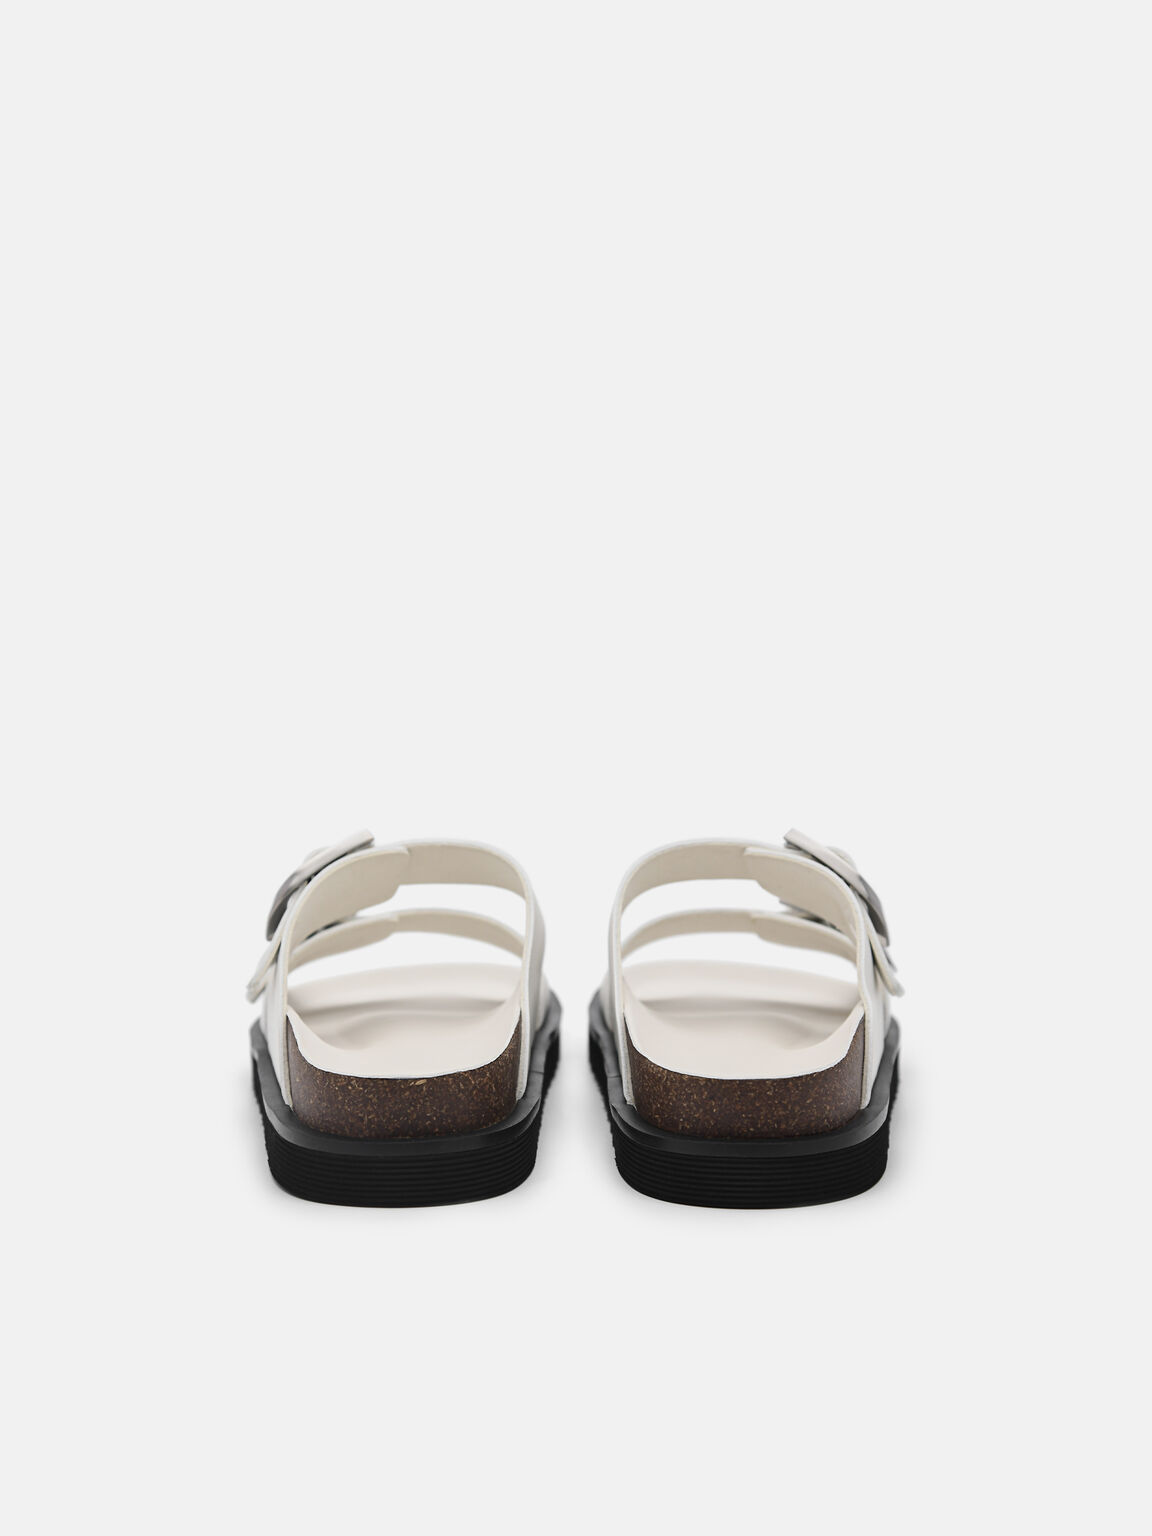 Helix Sandals, White